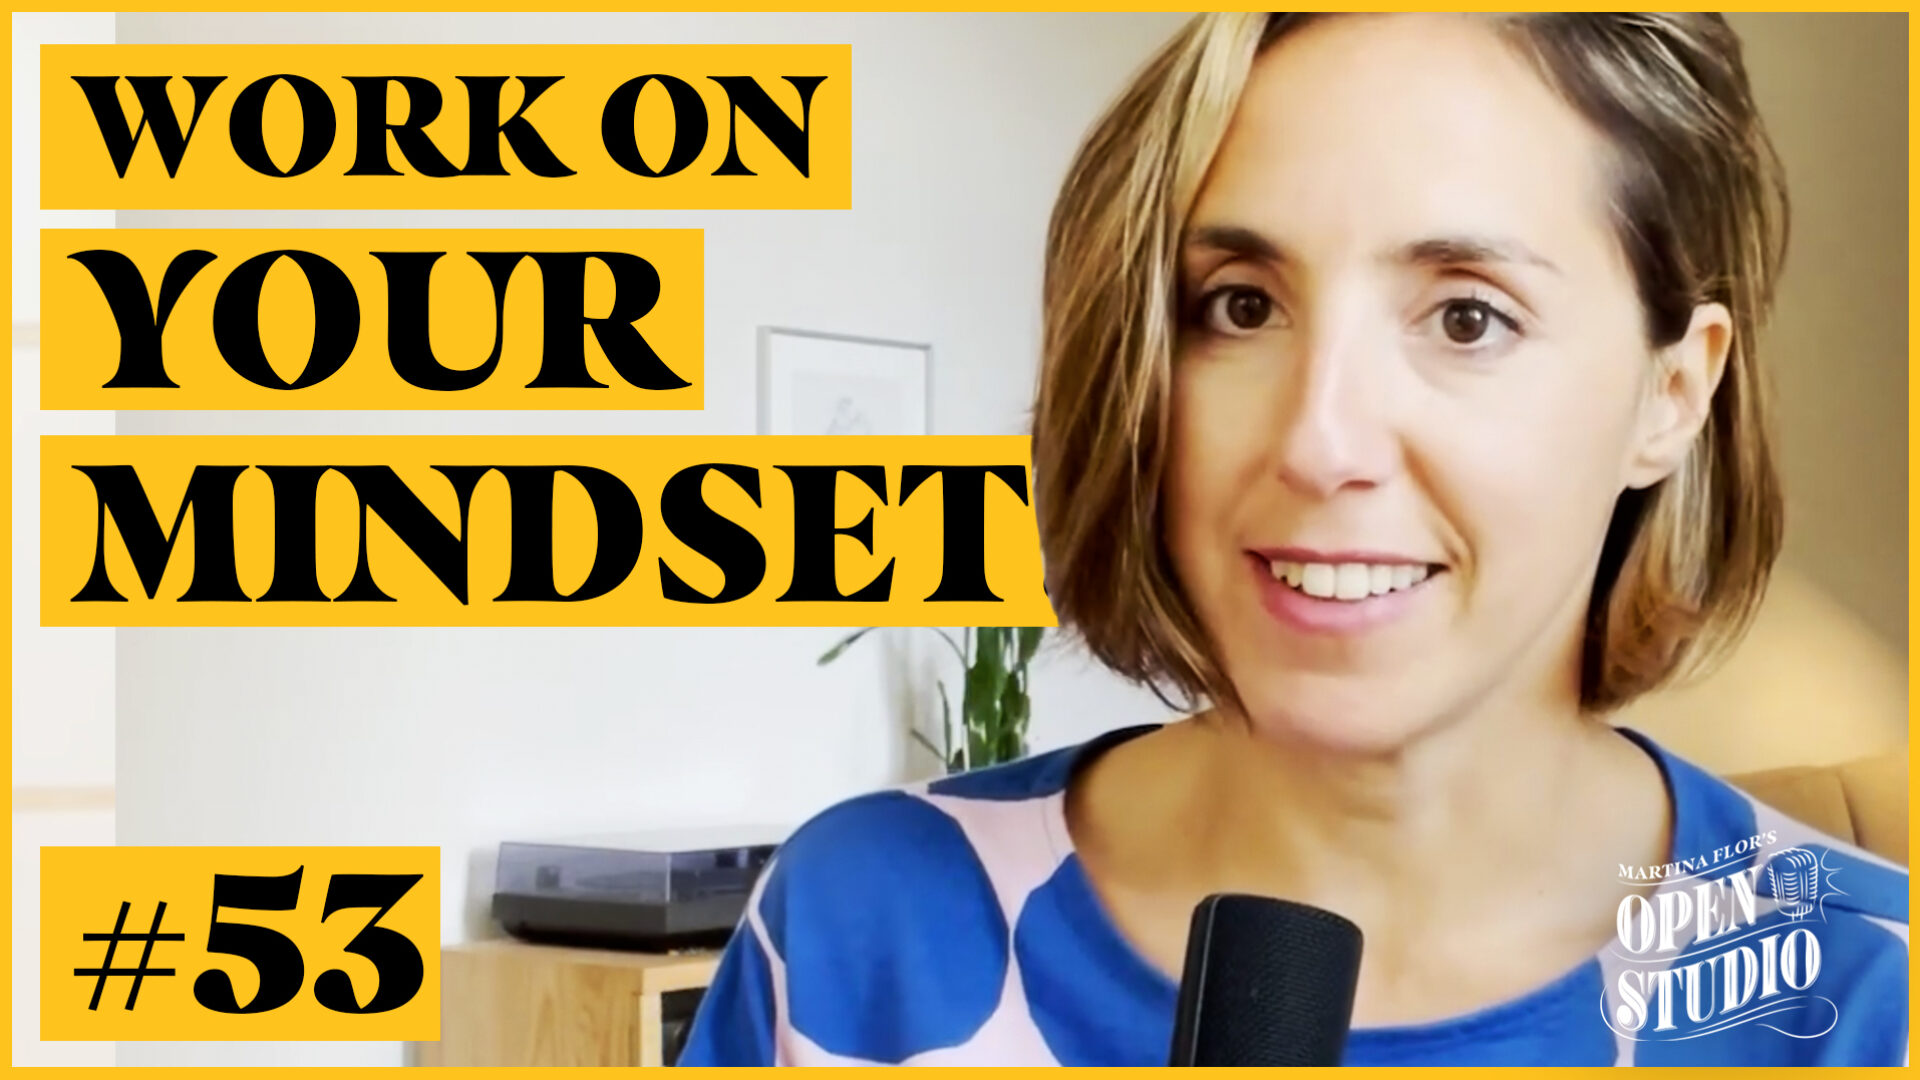 53. Martina Flor. Mindset – Are you a Starving Artist or a Thriving Artist?